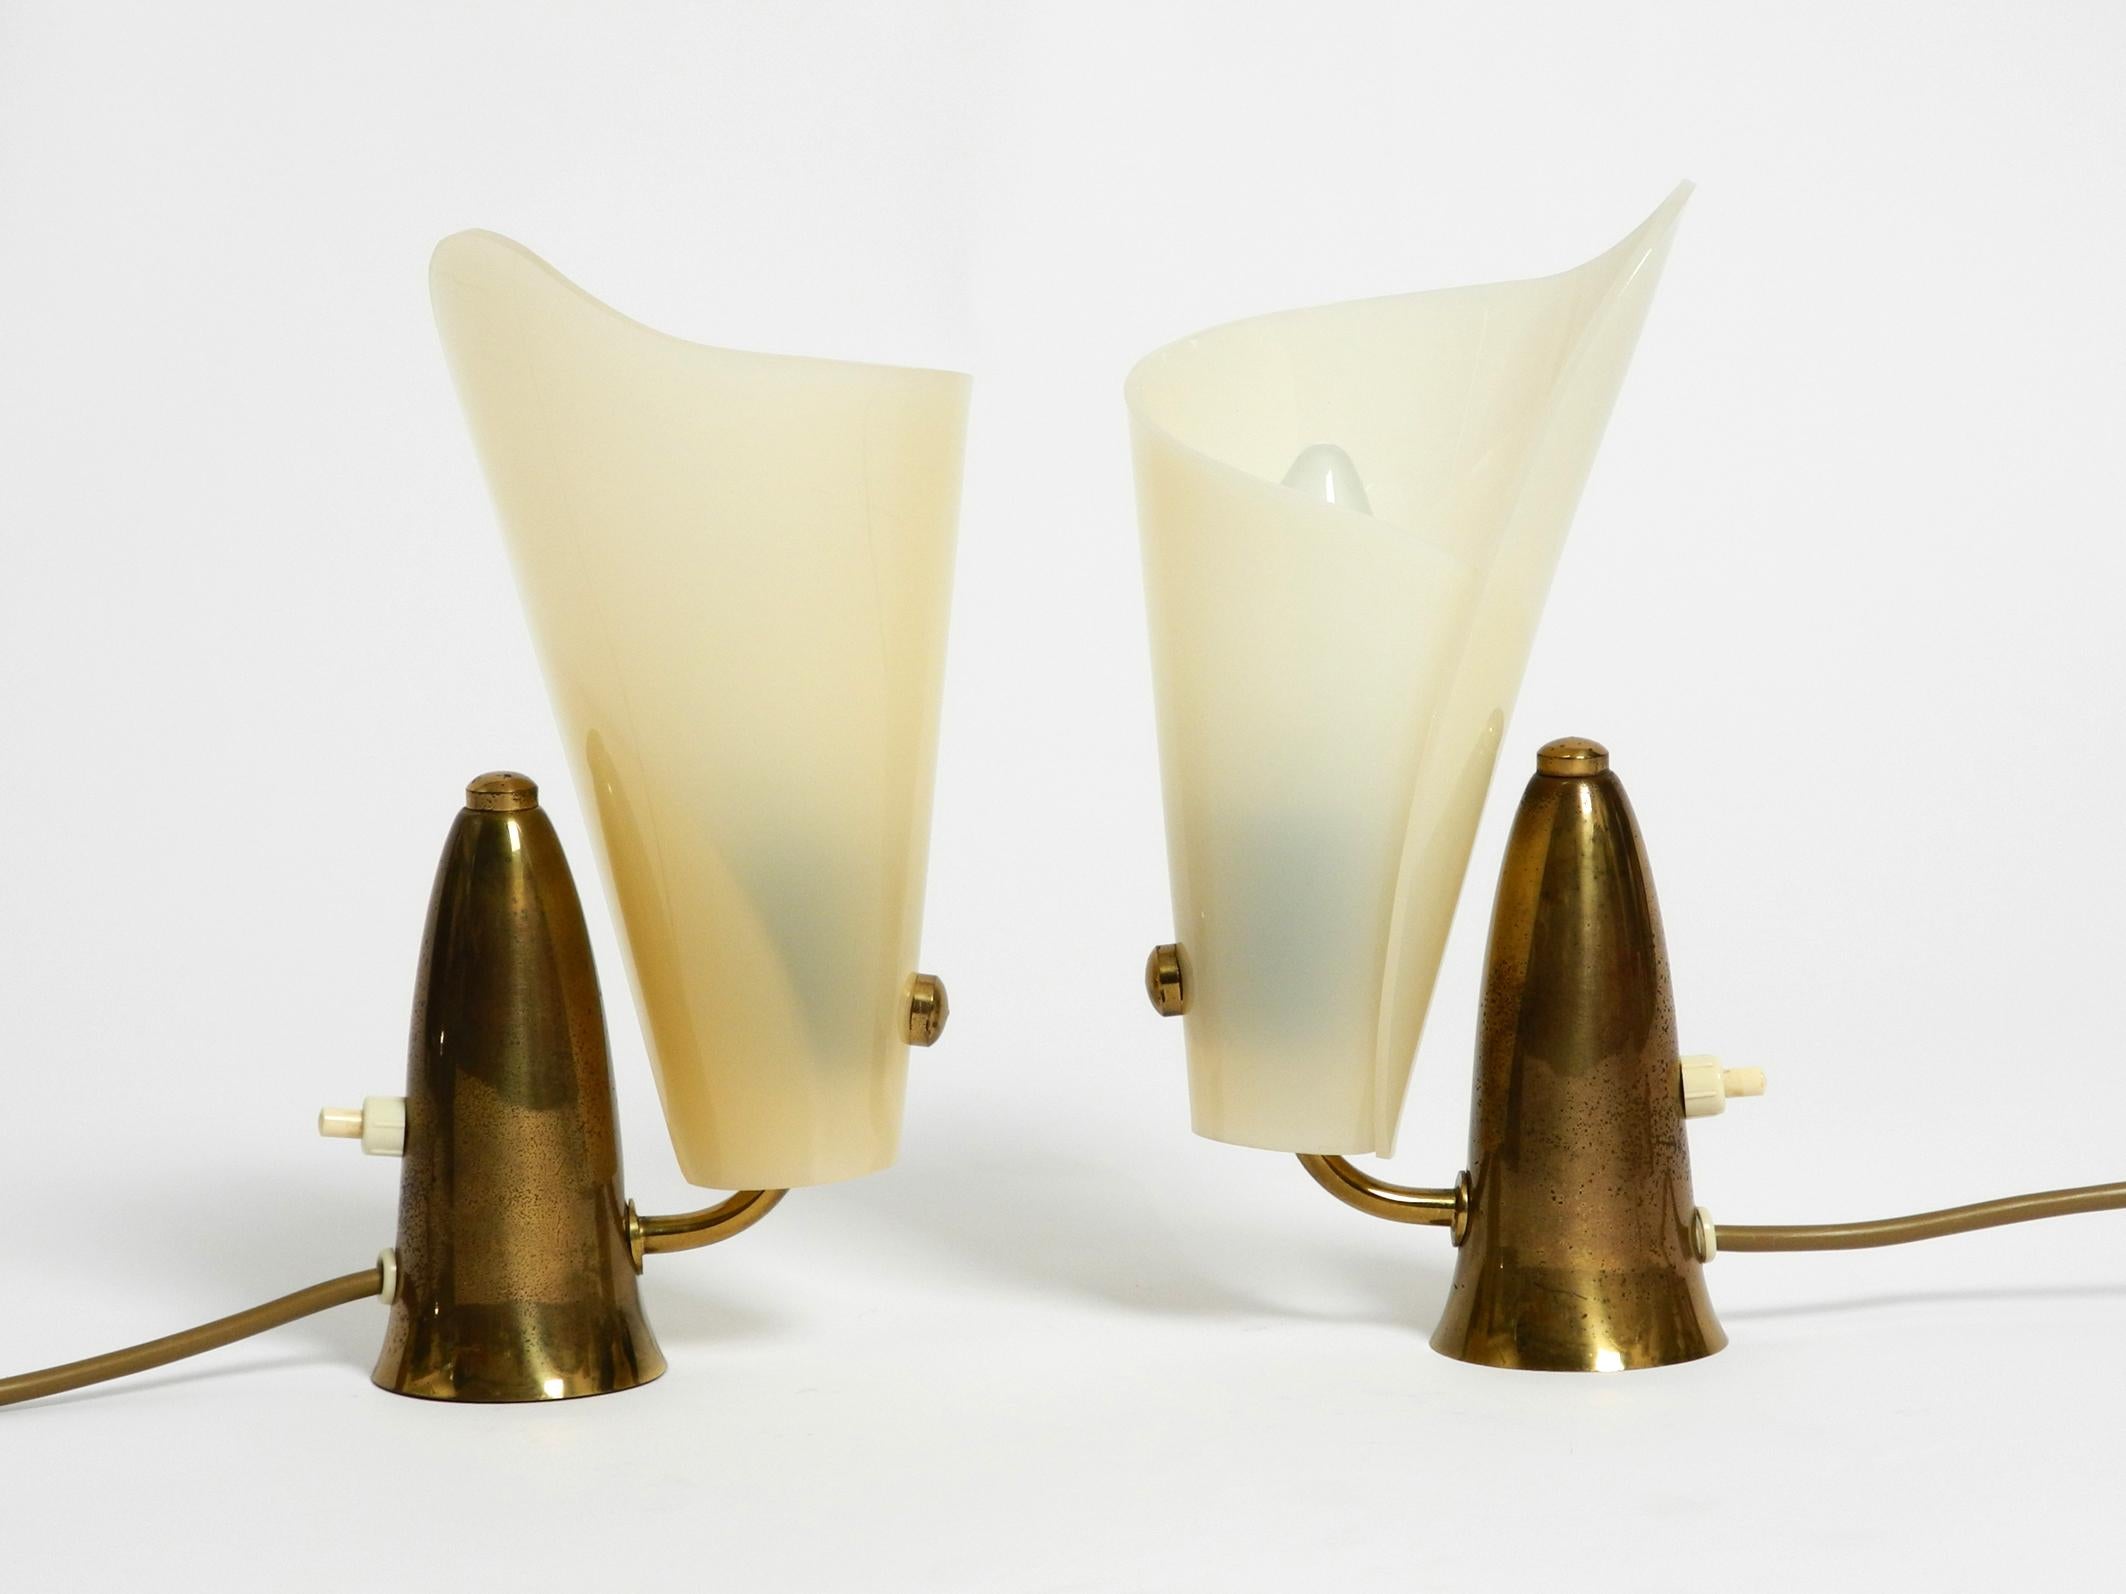 Pair of Rare Fancy Italian Midcentury Brass Table Lamps with Plexiglass Shades 1